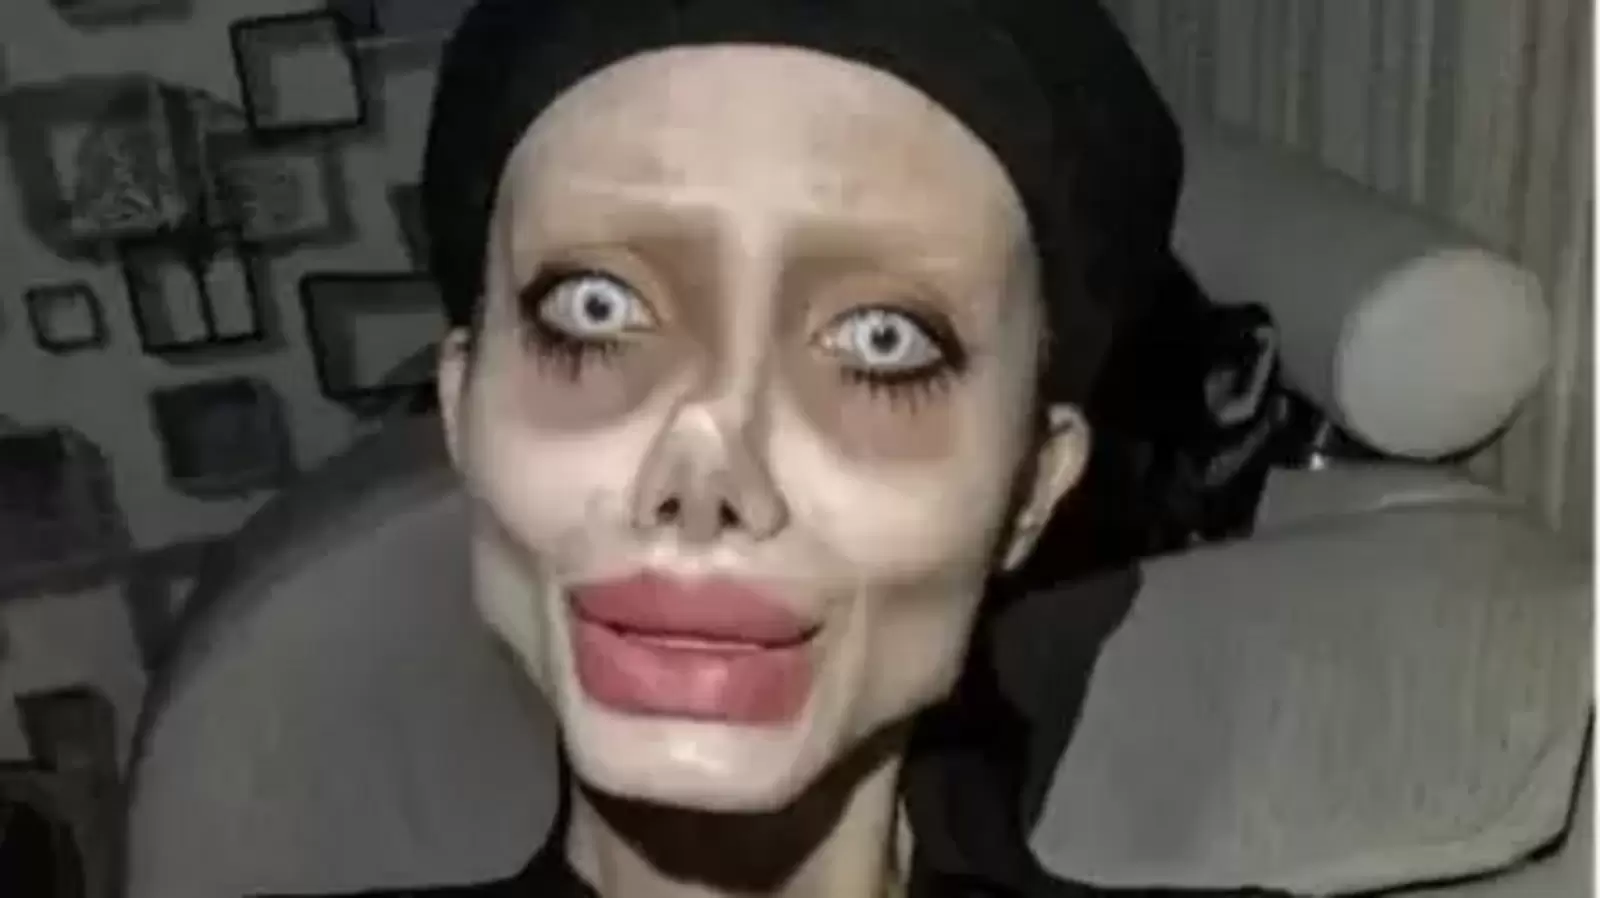 Irans Zombie Angelina Jolie shows real face, says viral look was a hoax Hollywood image